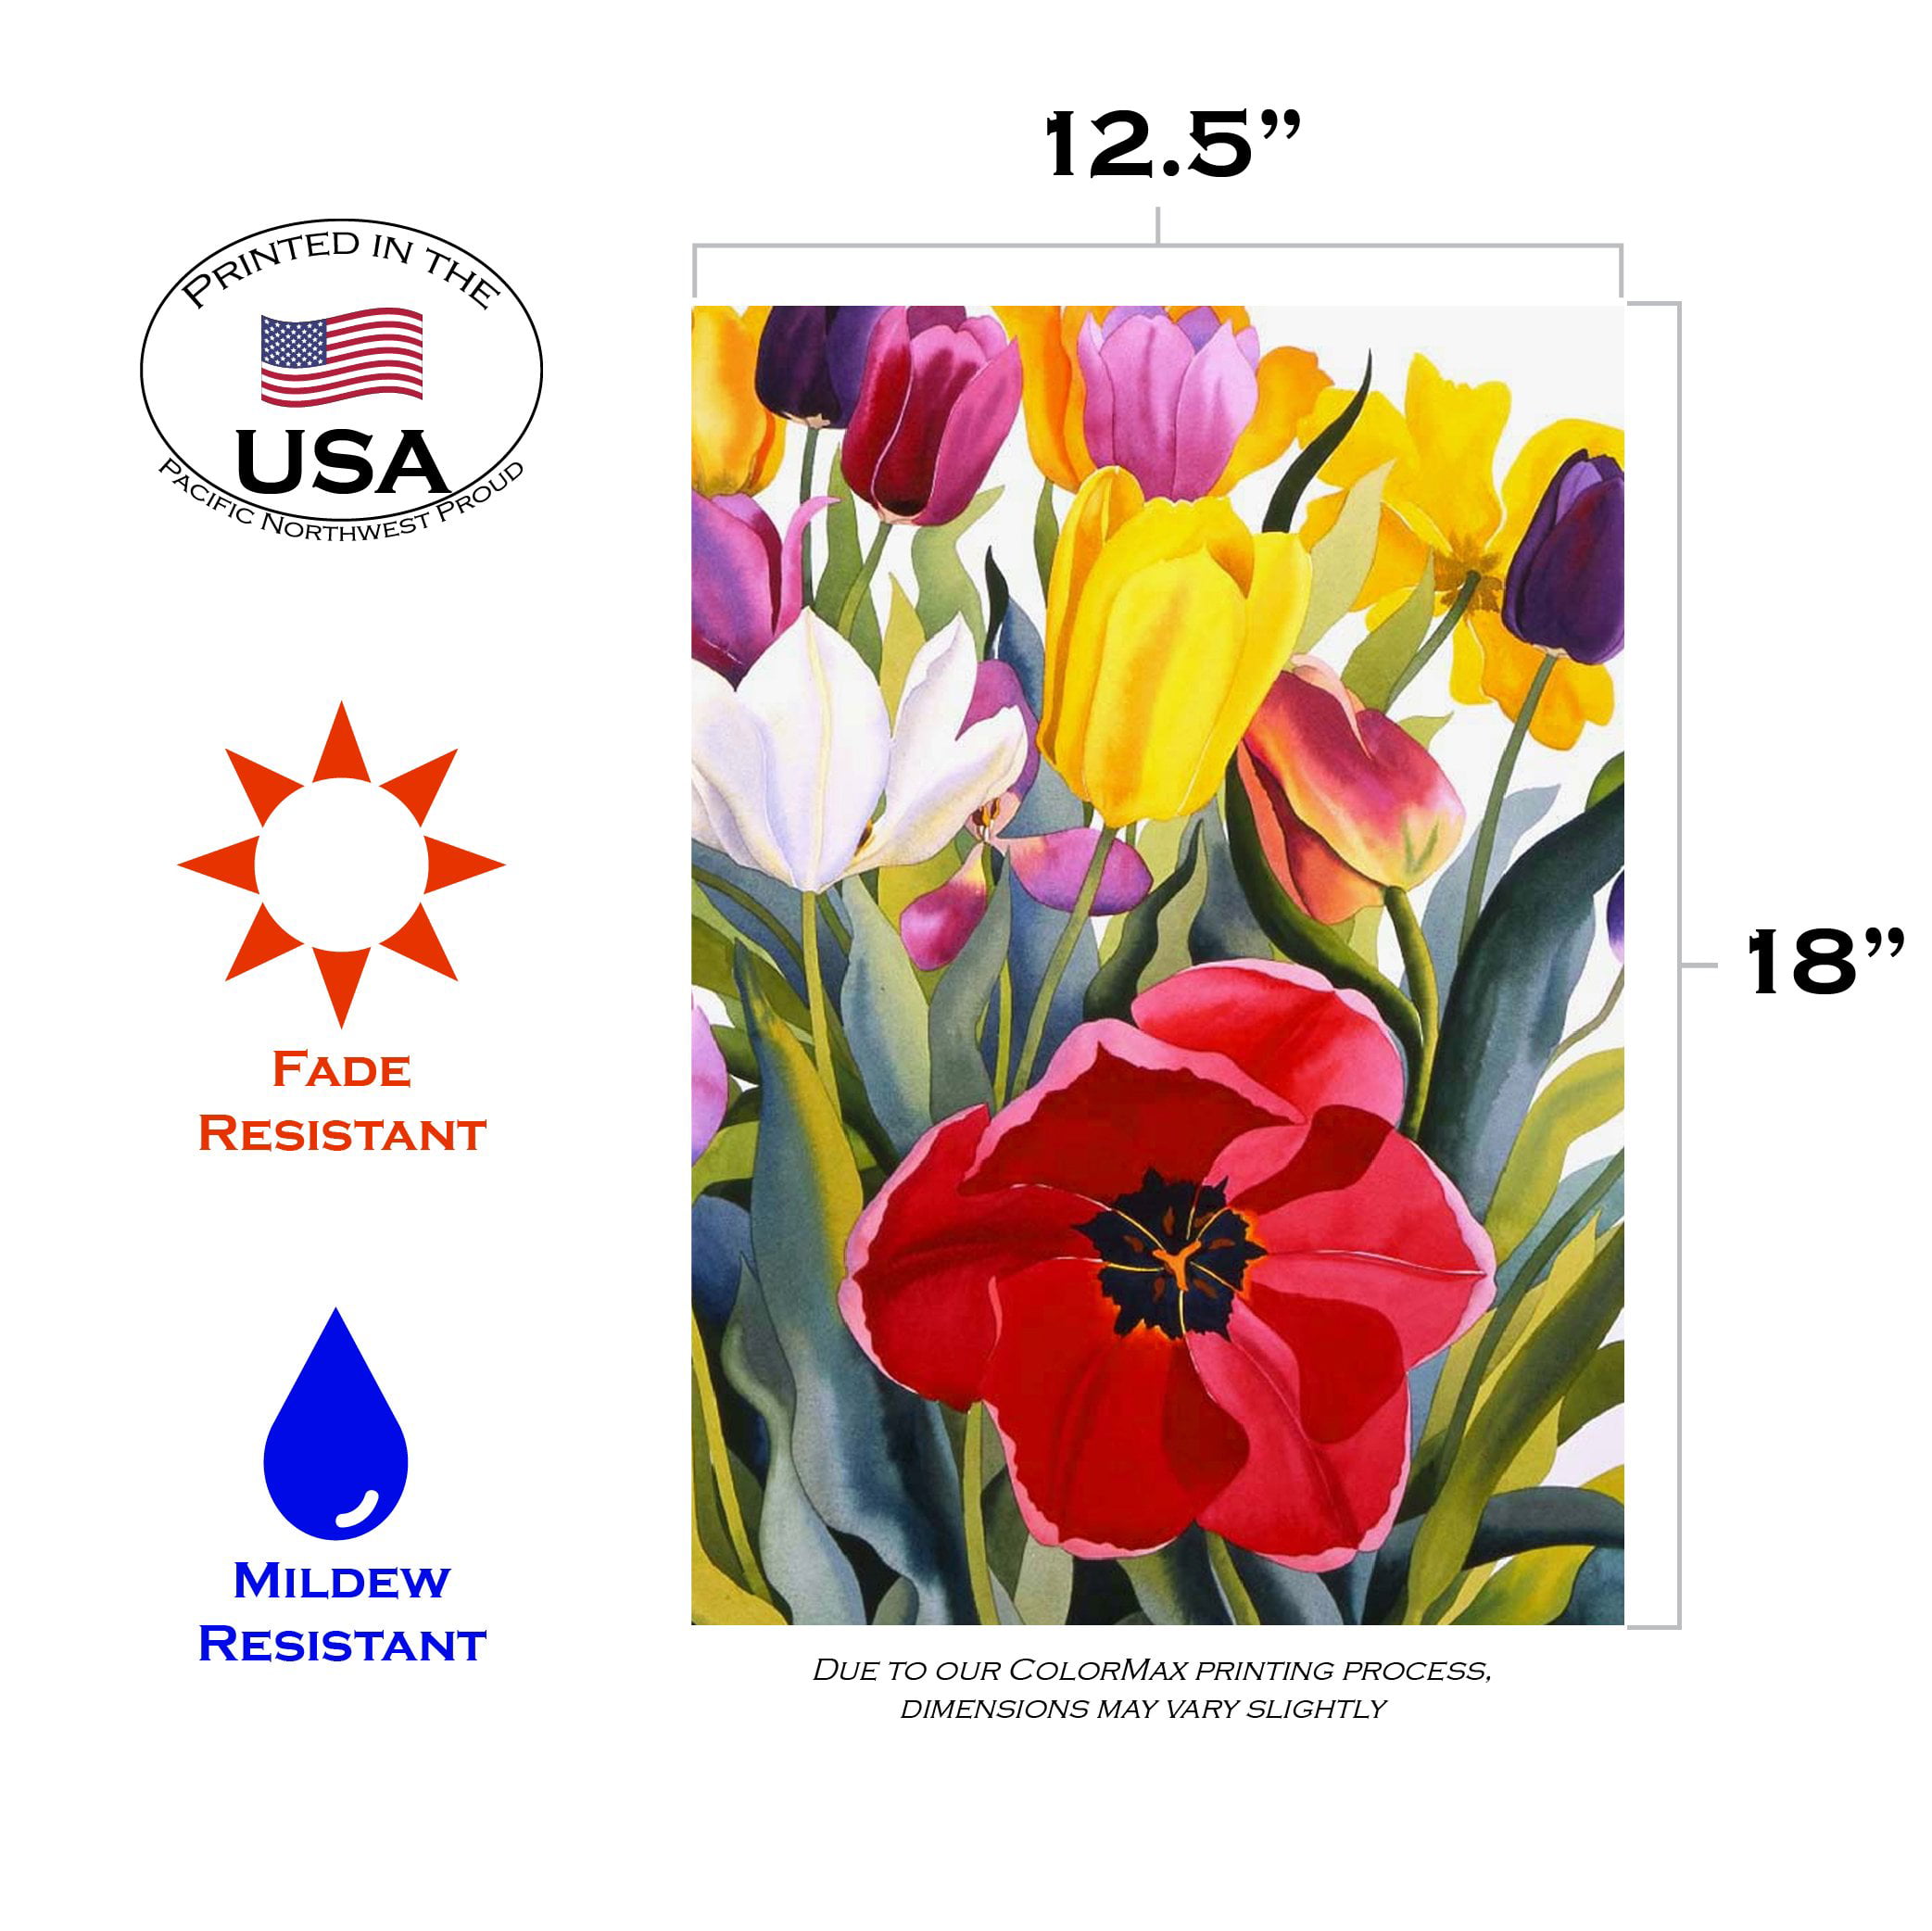 Toland Spring Tulips 28 x 40 Colorful Tulip Flower Double Sided House Flag